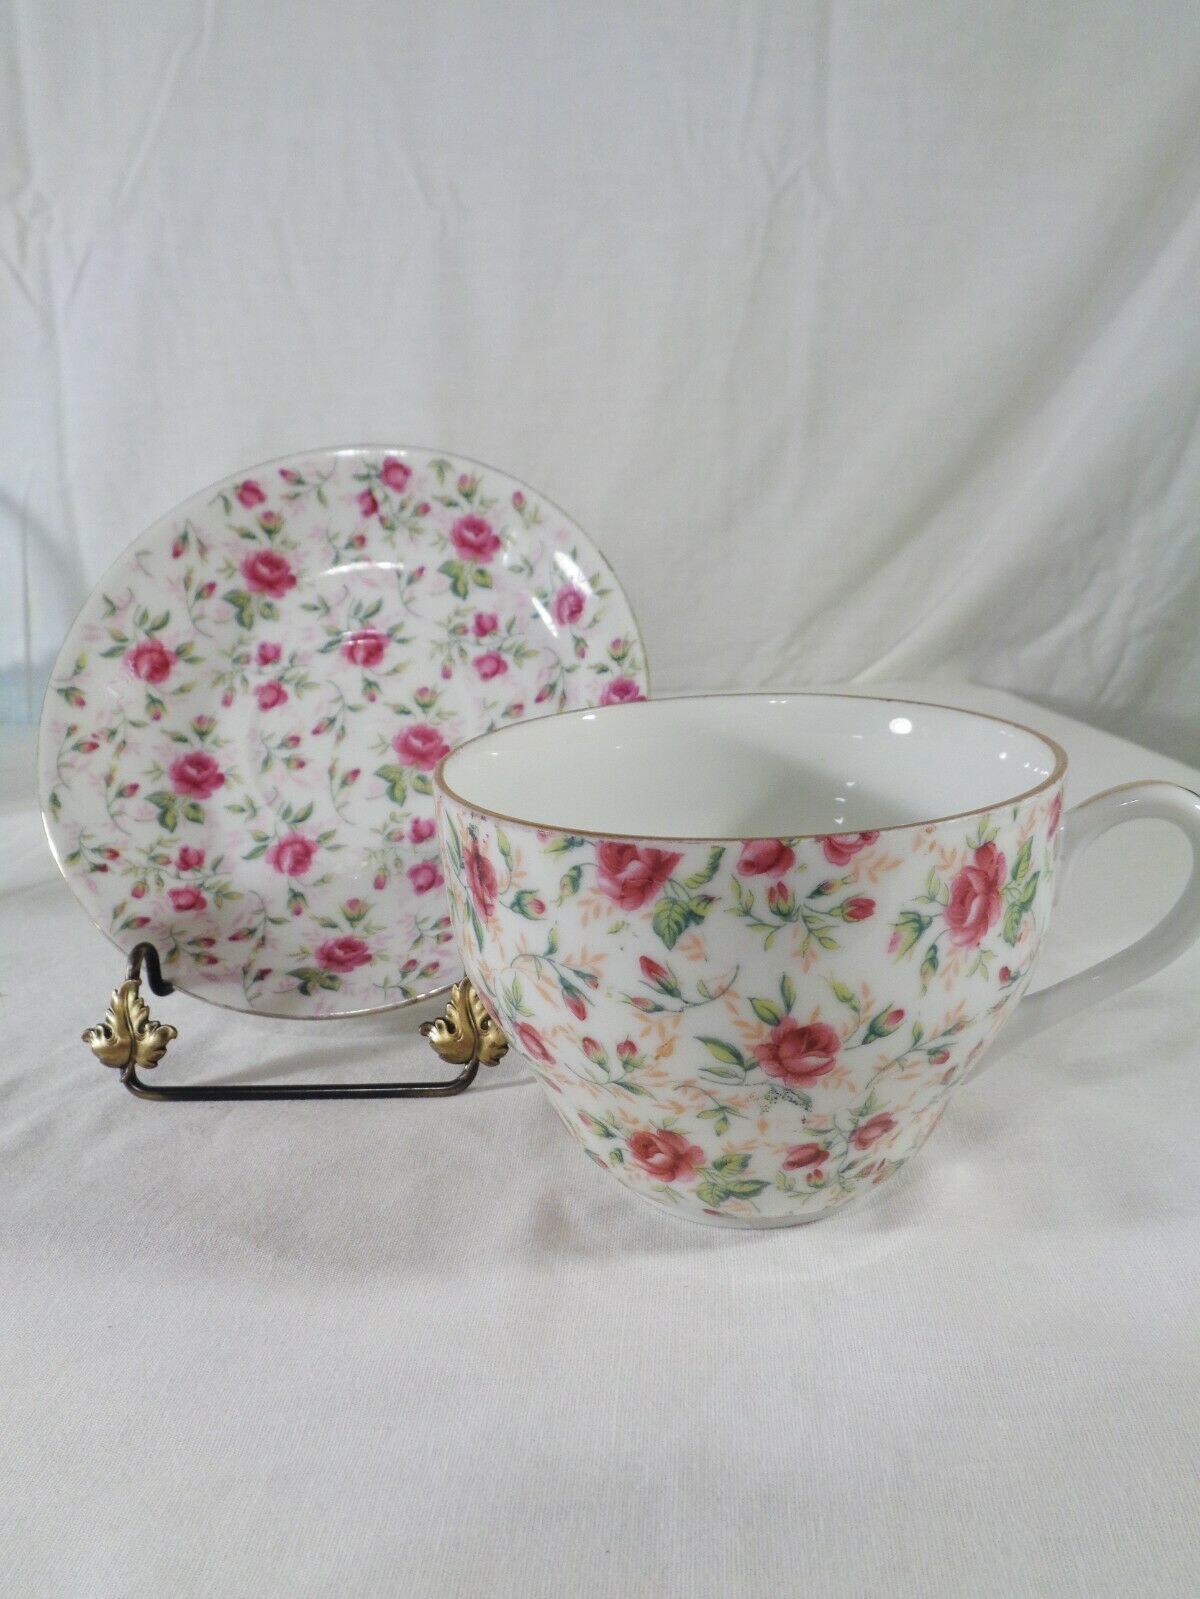 Vintage Lefton Rose Chintz Oversized Cup And Saucer #2356r